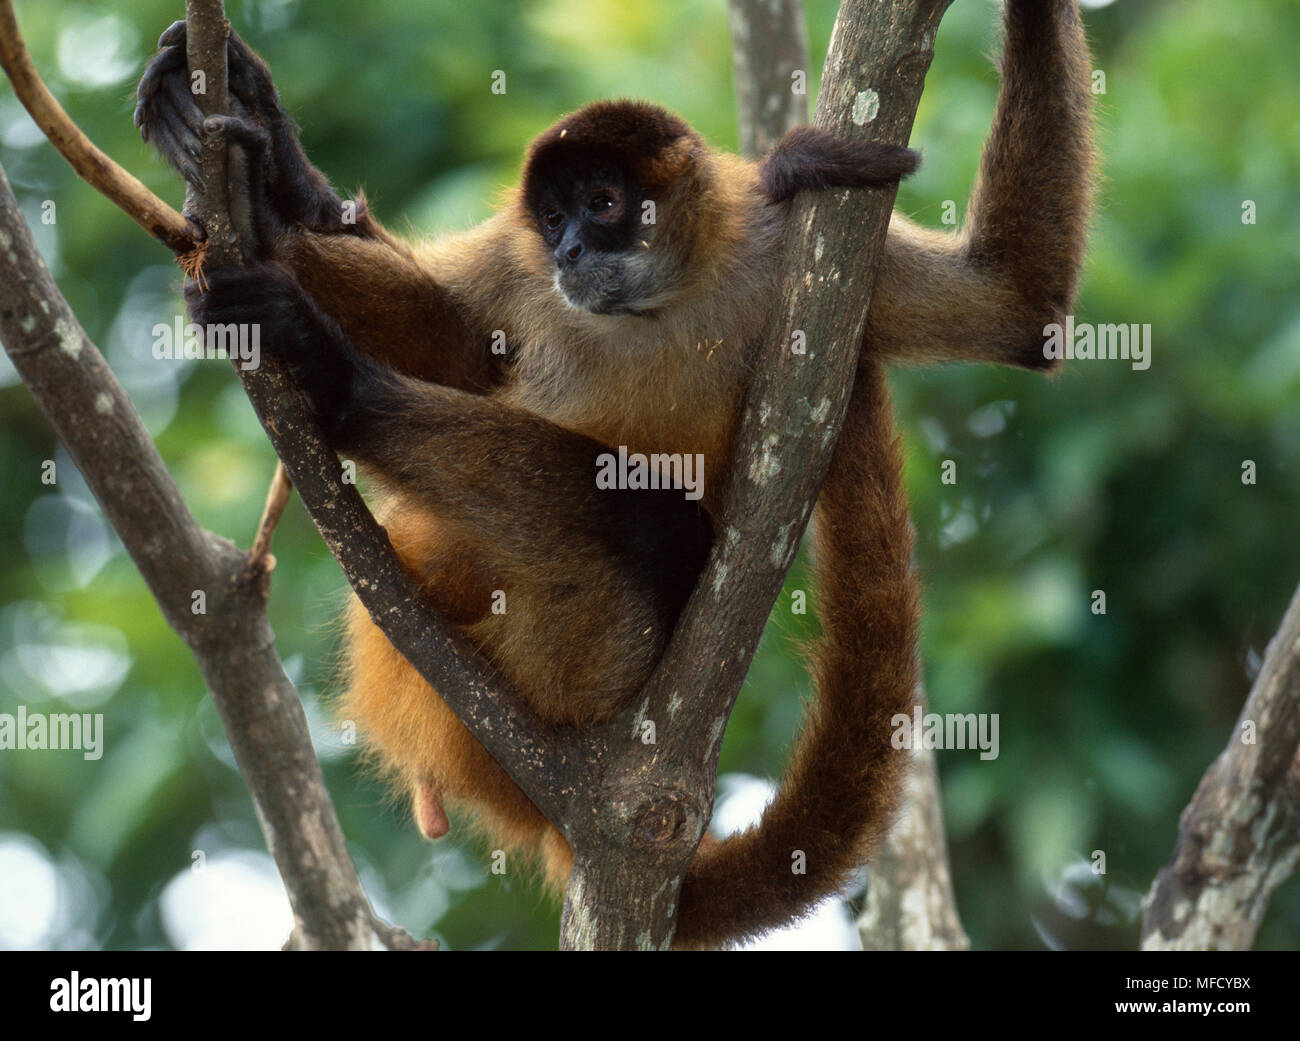 BLACK-HANDED SPIDER MONKEY  Ateles geoffroyi  Costa Rica, Central America  Endangered species Stock Photo